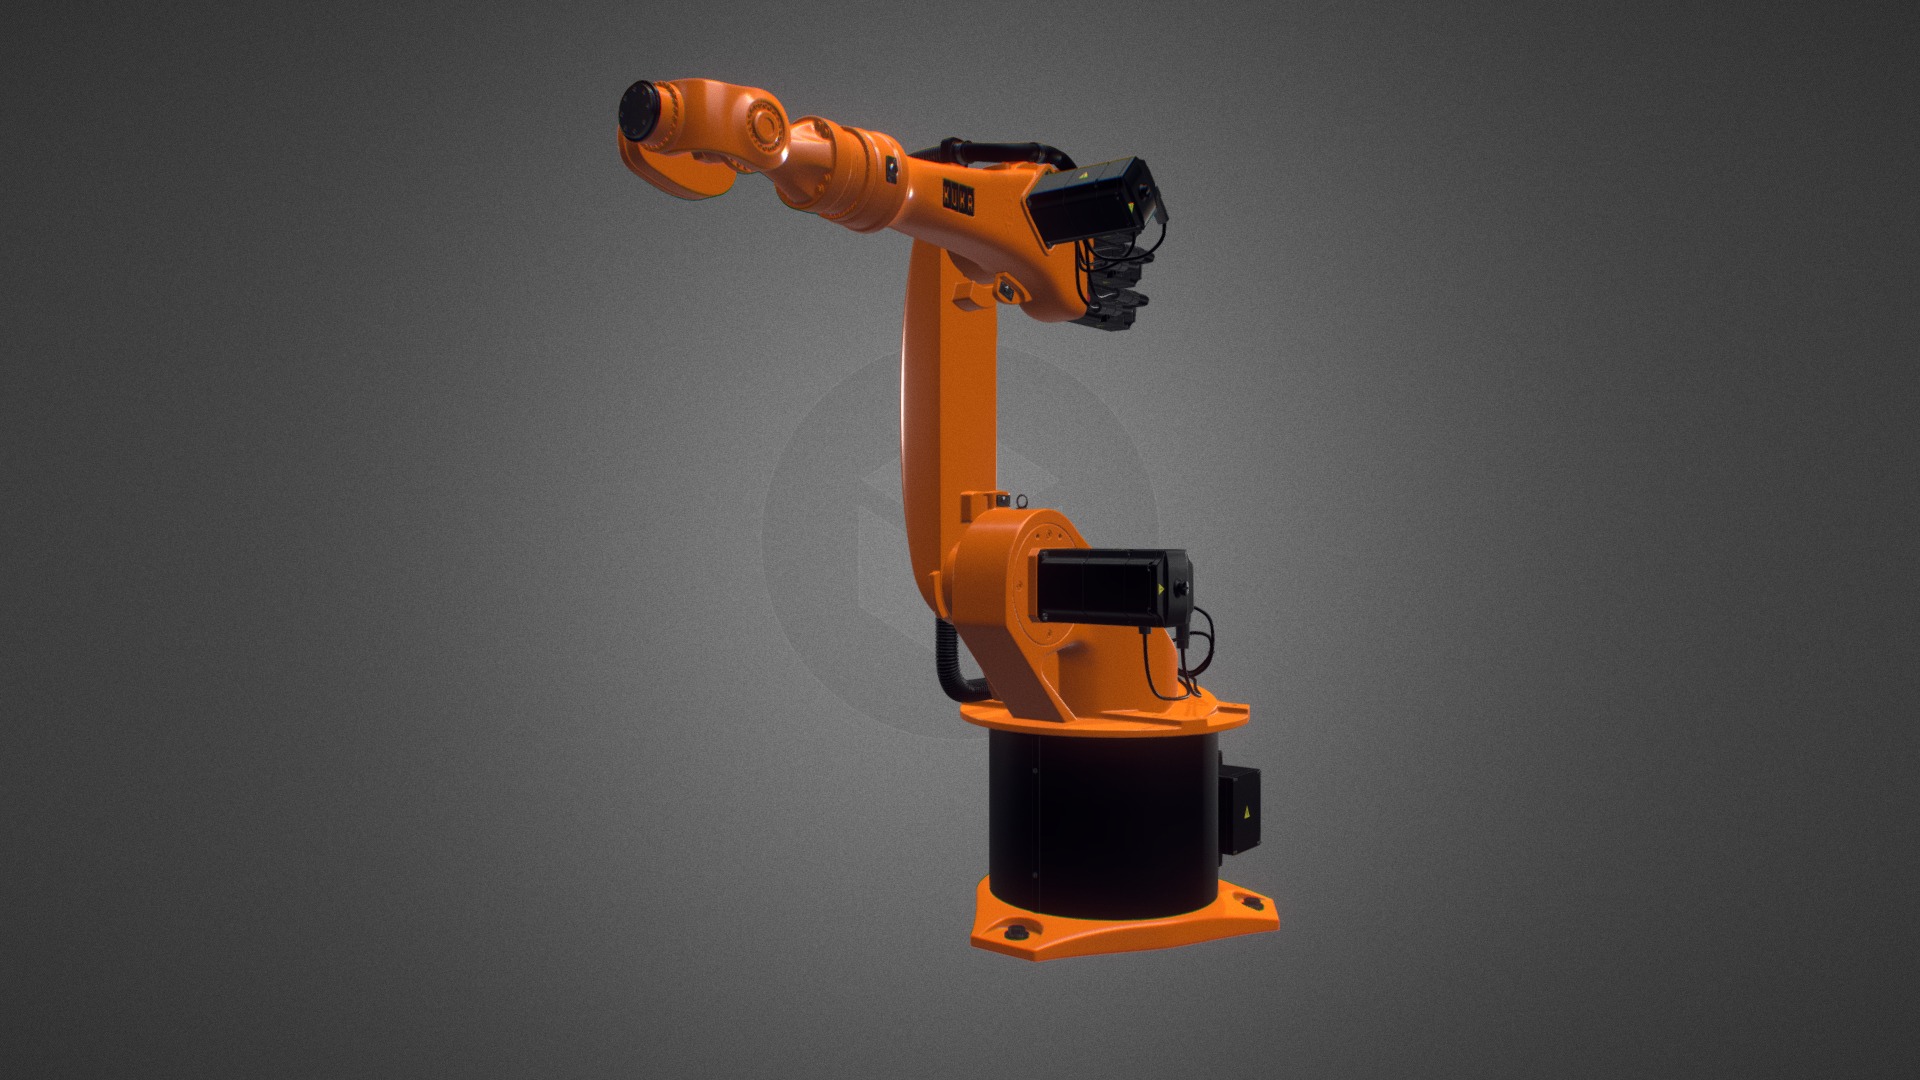 3D model Kuka Robot KR 16-3 for Element 3D - This is a 3D model of the Kuka Robot KR 16-3 for Element 3D. The 3D model is about a yellow and orange robot.